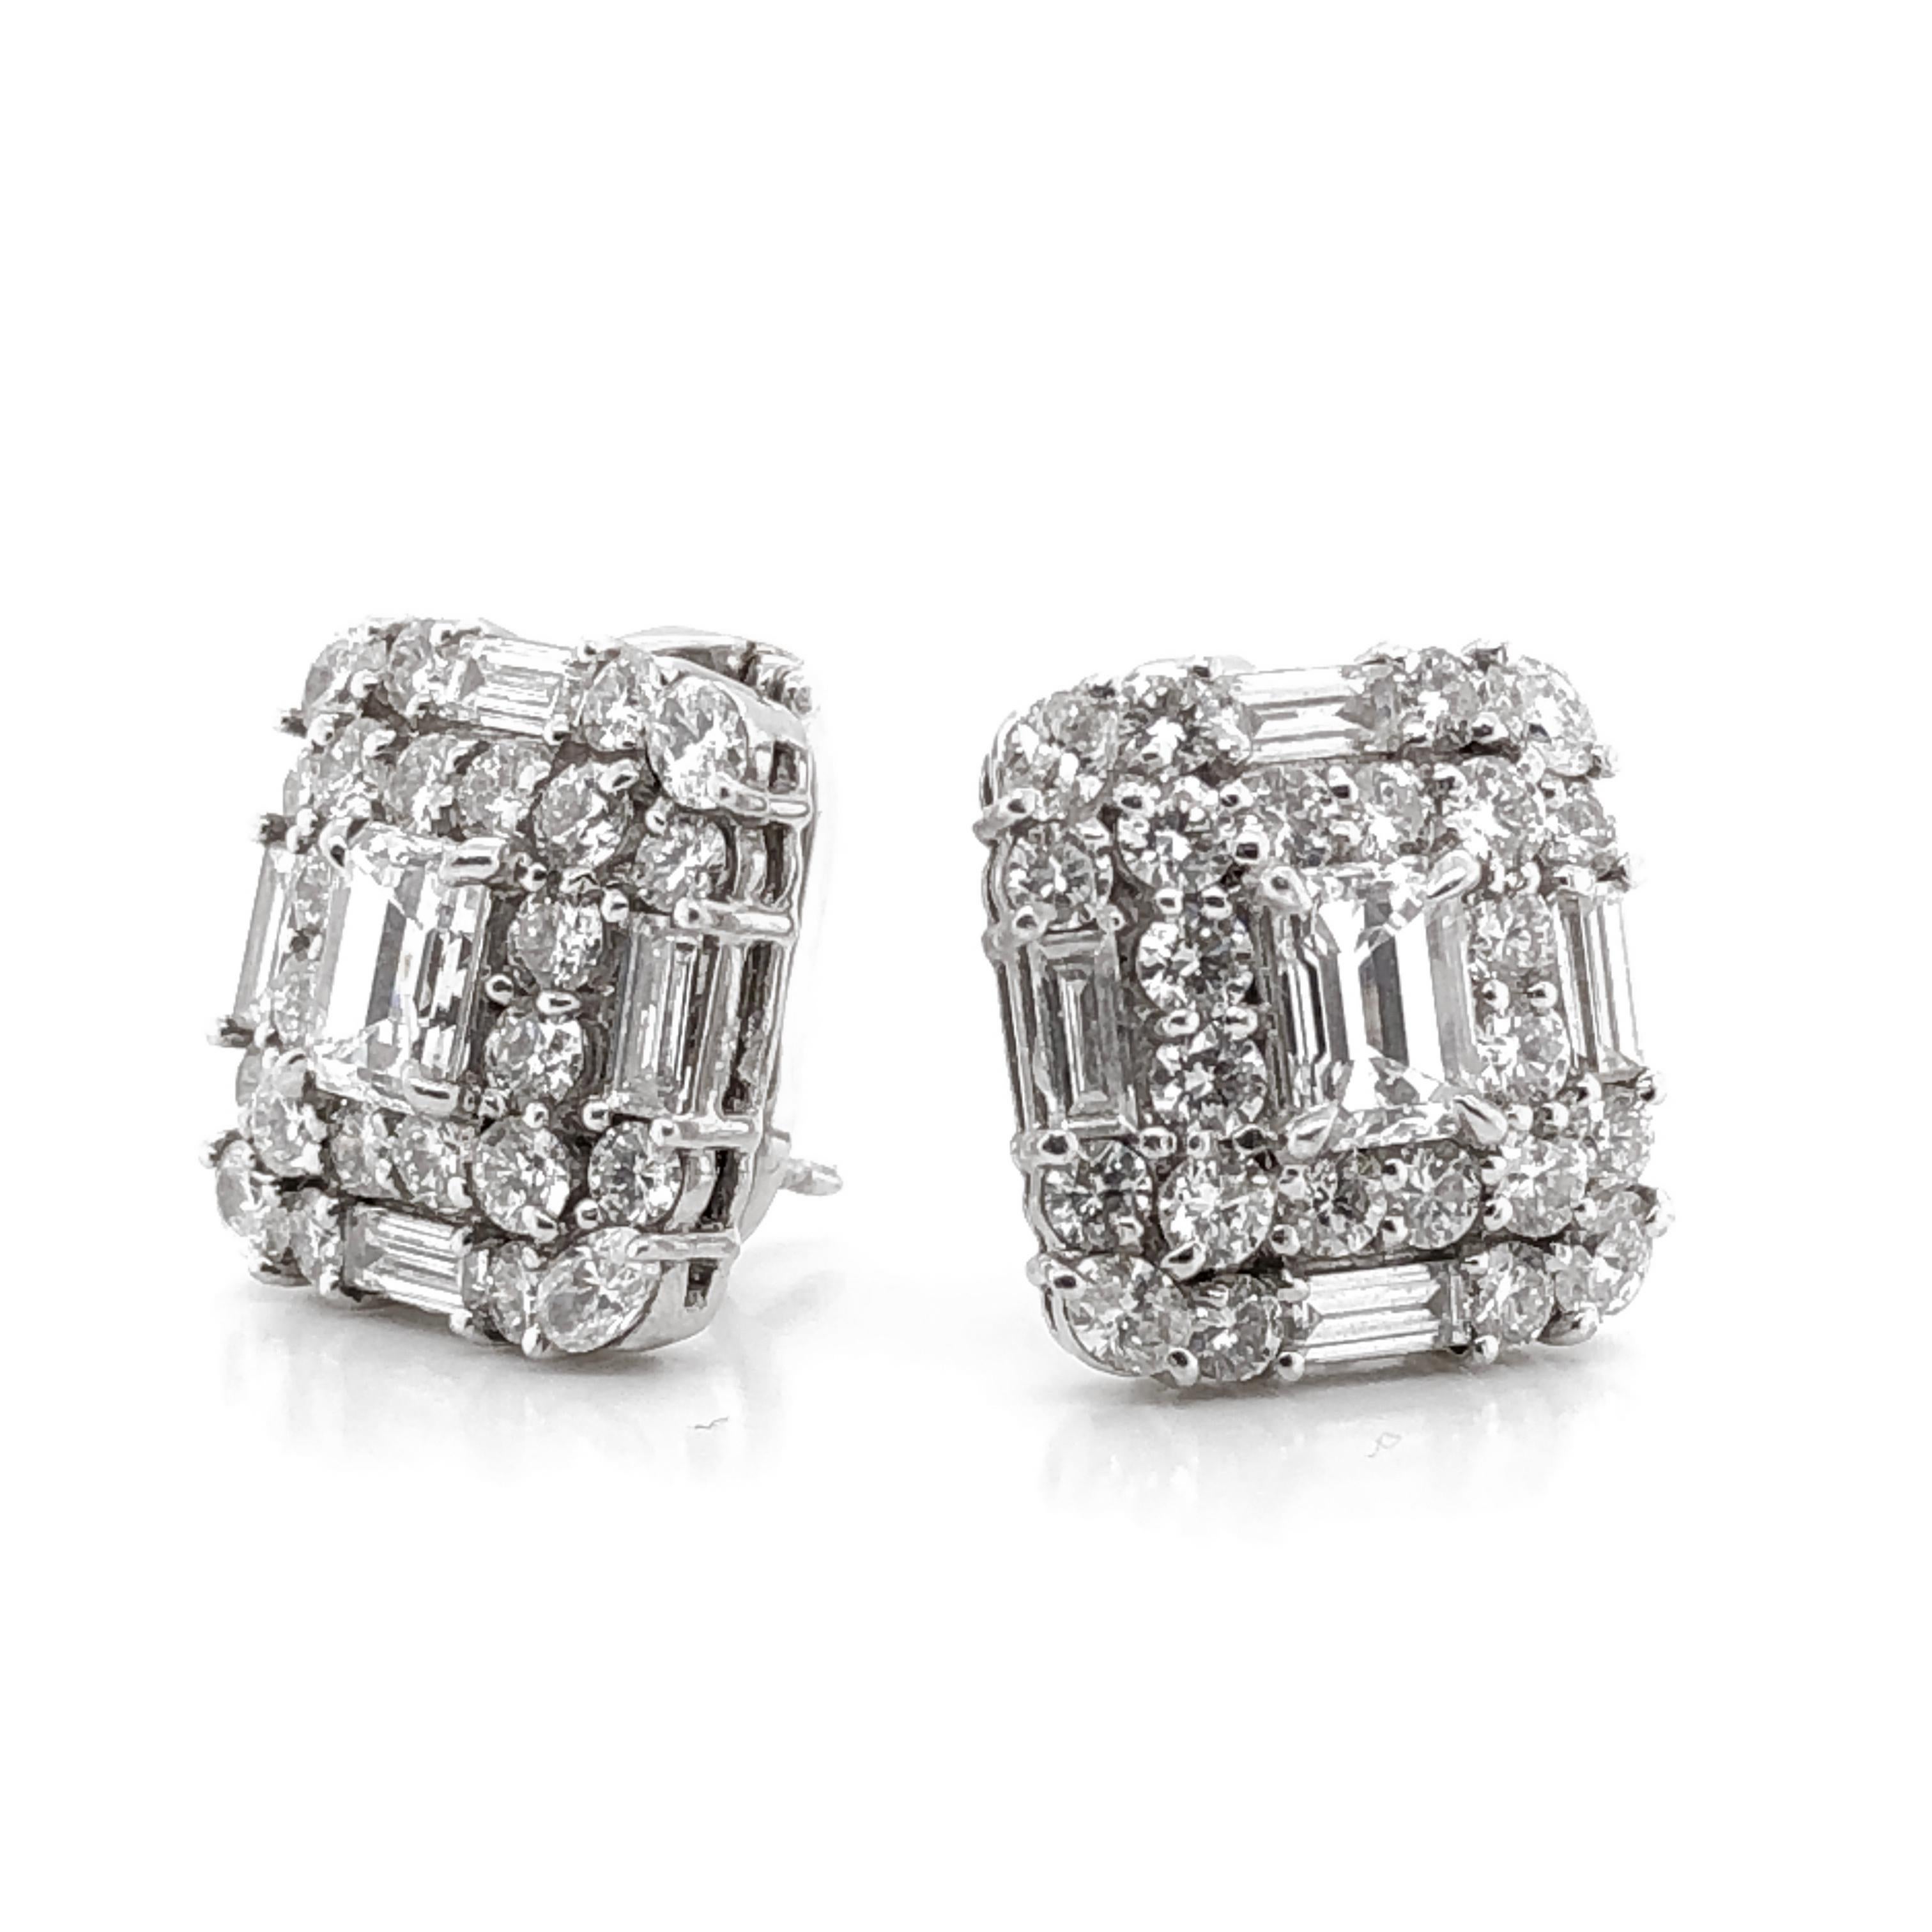 Gorgeous flower inspired contemporary earrings in platinum 950.
Earrings adorned with white natural diamonds.
Center diamonds are GIA certified square emerald cut 1.87 ct.
Accent of pear cut diamonds 4.96 ct. 
All diamonds are in G-H Color Clarity